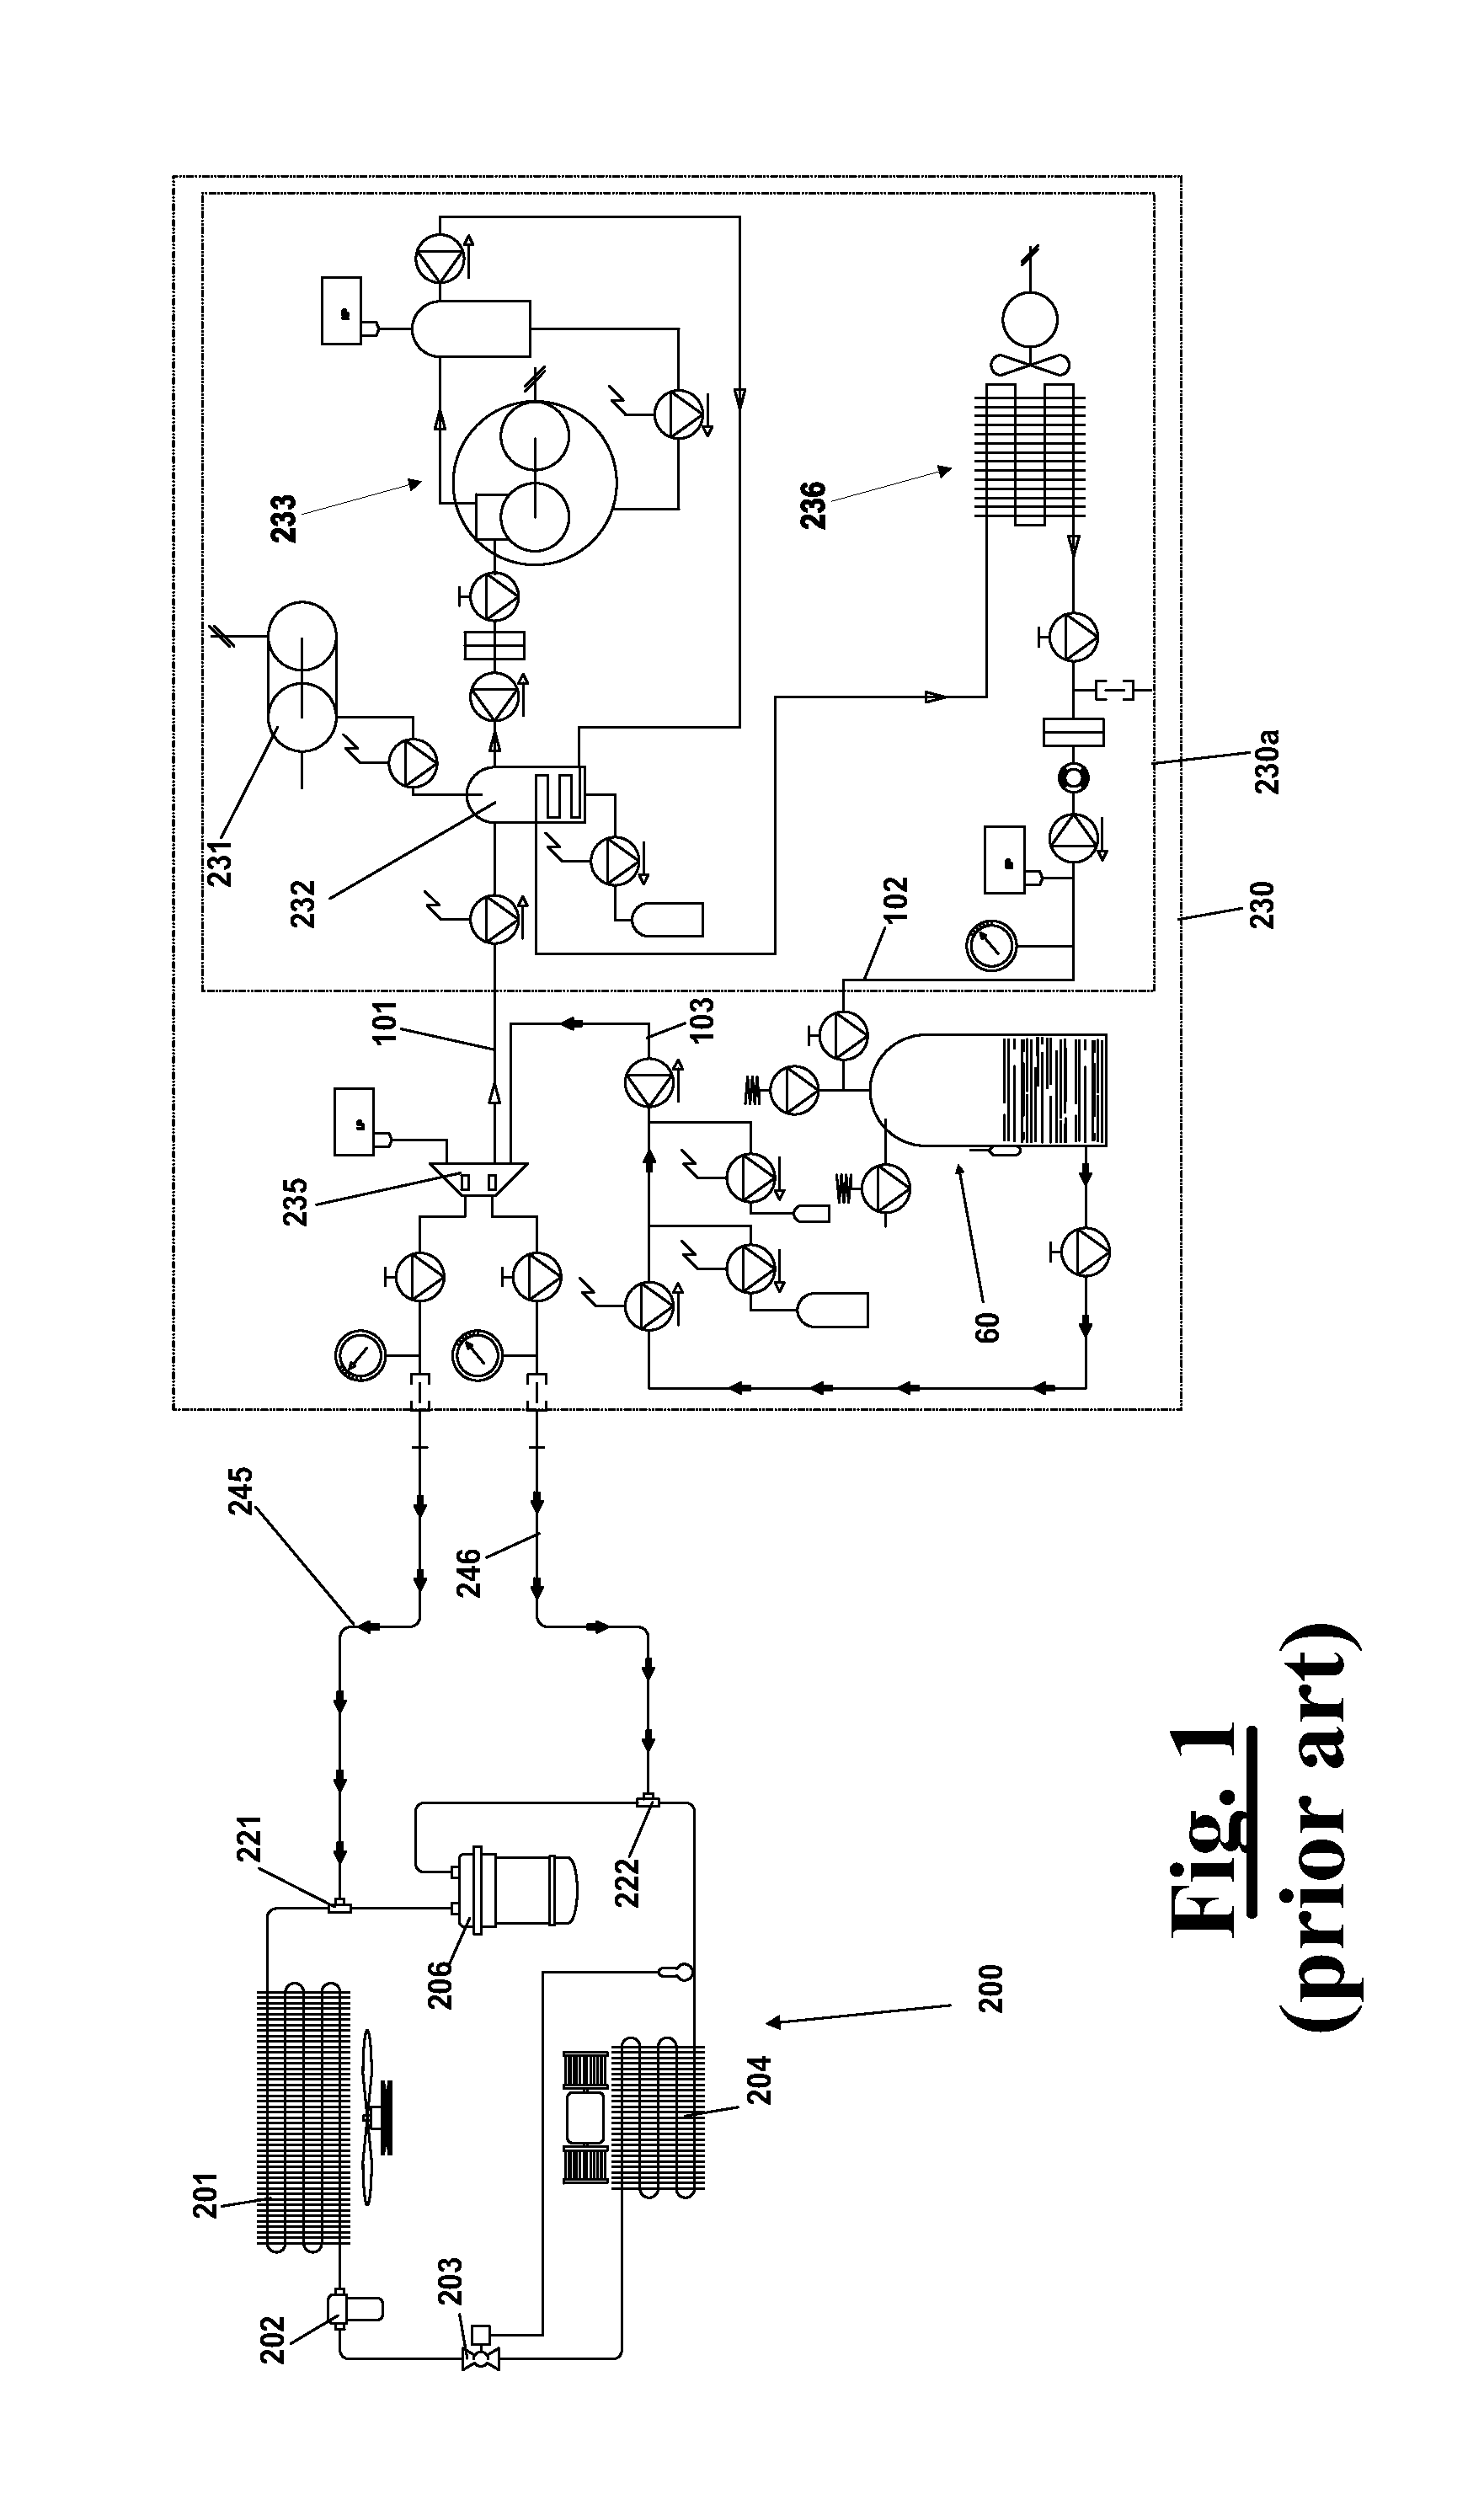 Apparatus and method for recovering and regenerating a refrigerant from an a/c plant